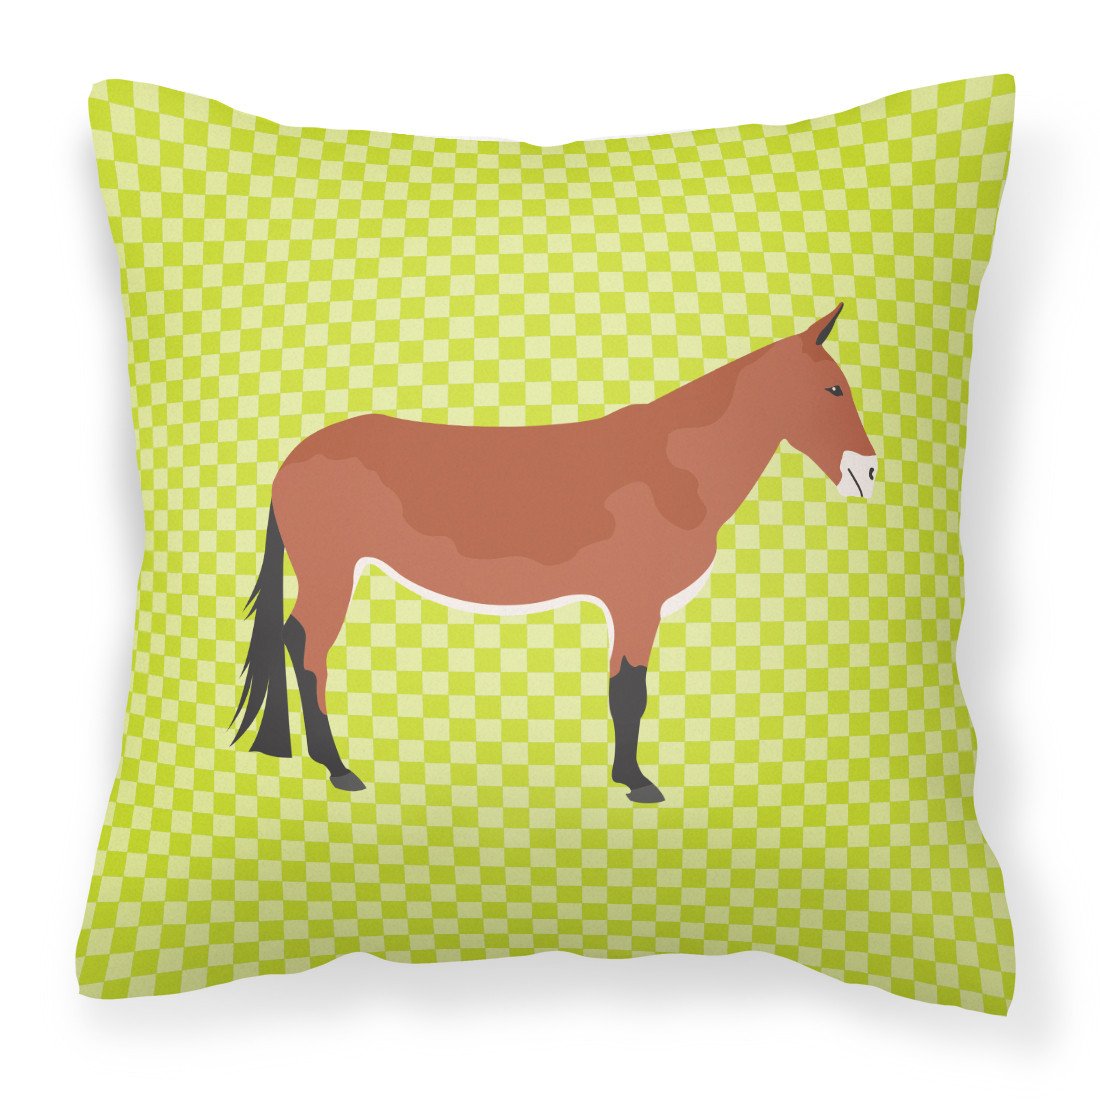 Mule Green Fabric Decorative Pillow BB7671PW1818 by Caroline's Treasures